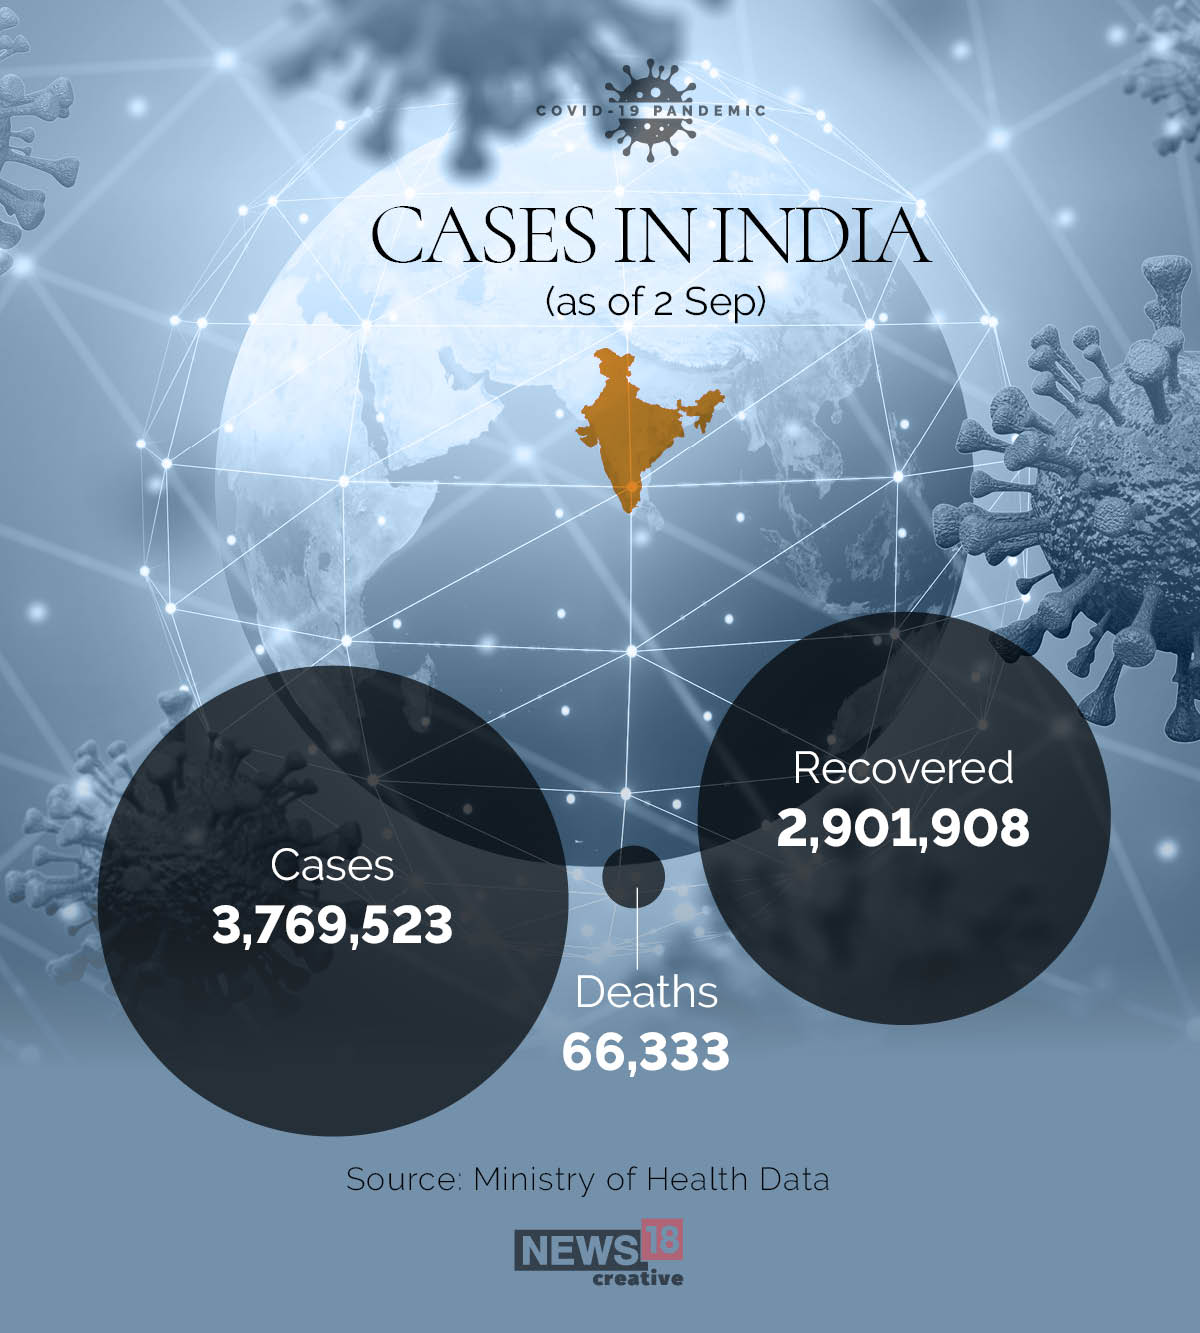 54% of India's Covid-19 cases are in the 18-44 age group